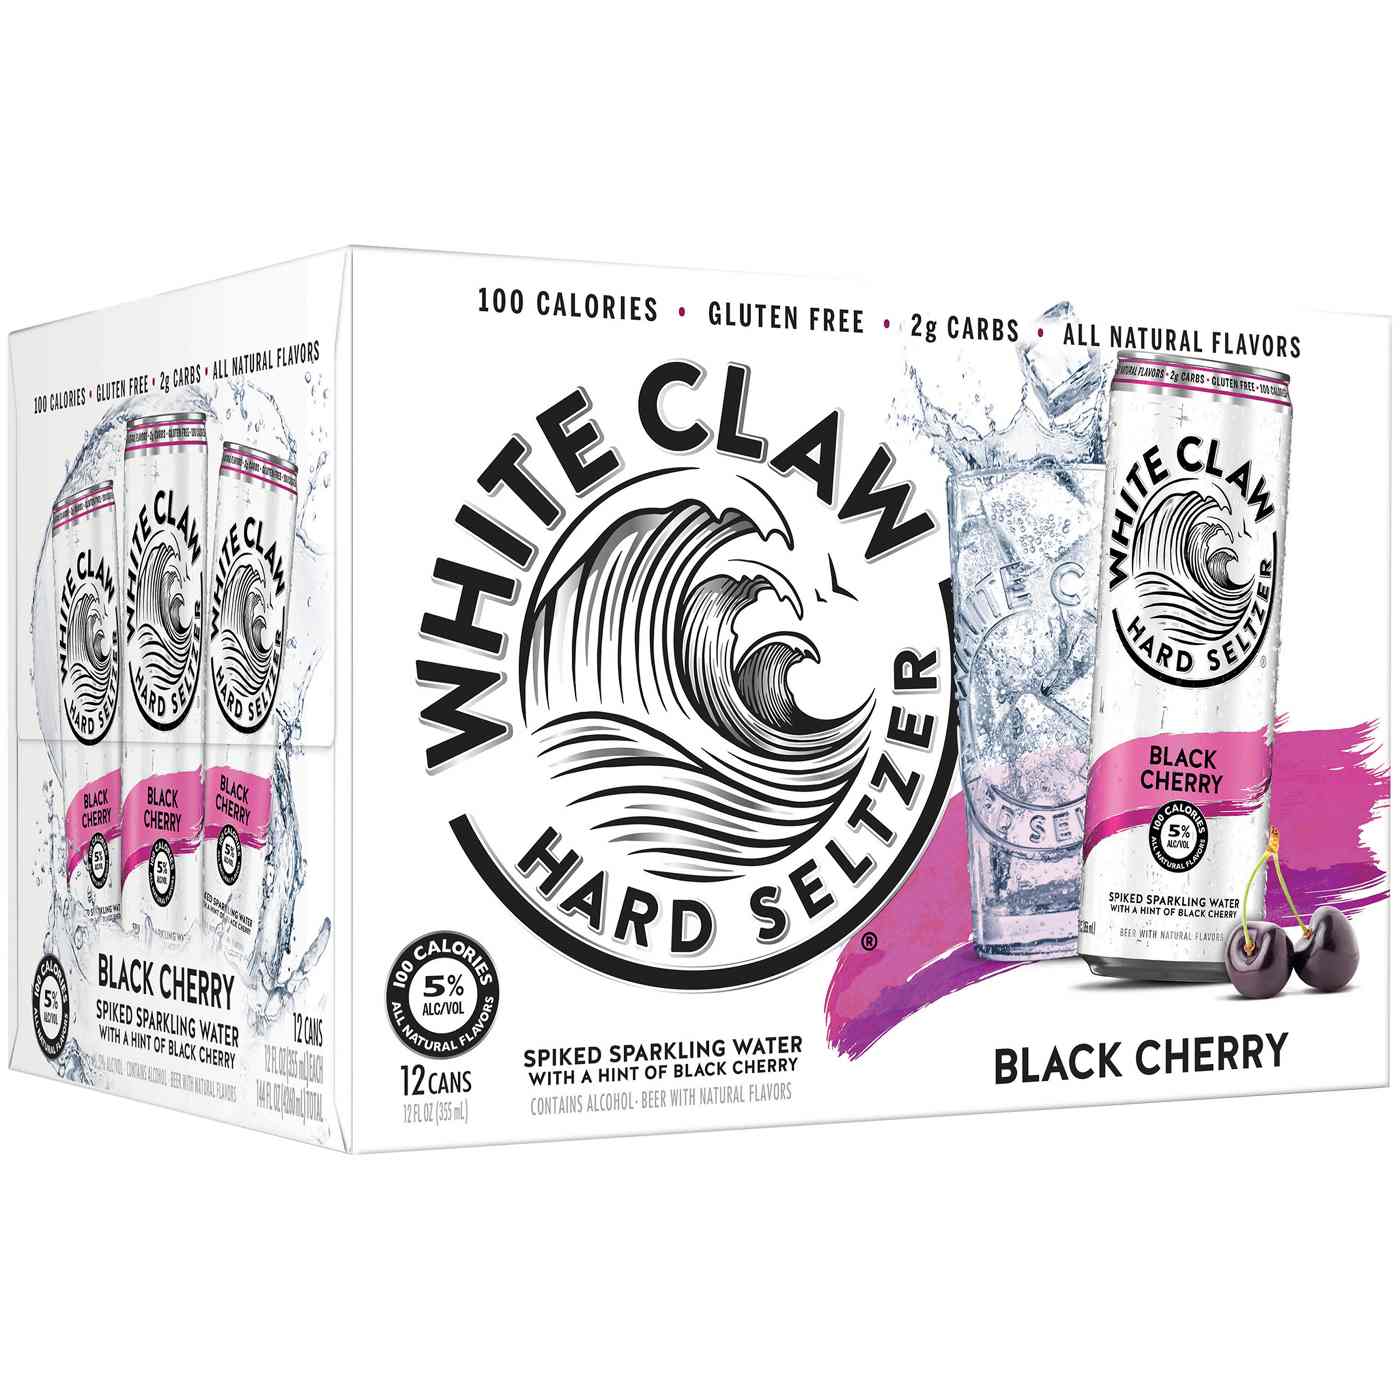 White Claw Black Cherry Hard Seltzer 12 pk Cans; image 2 of 2